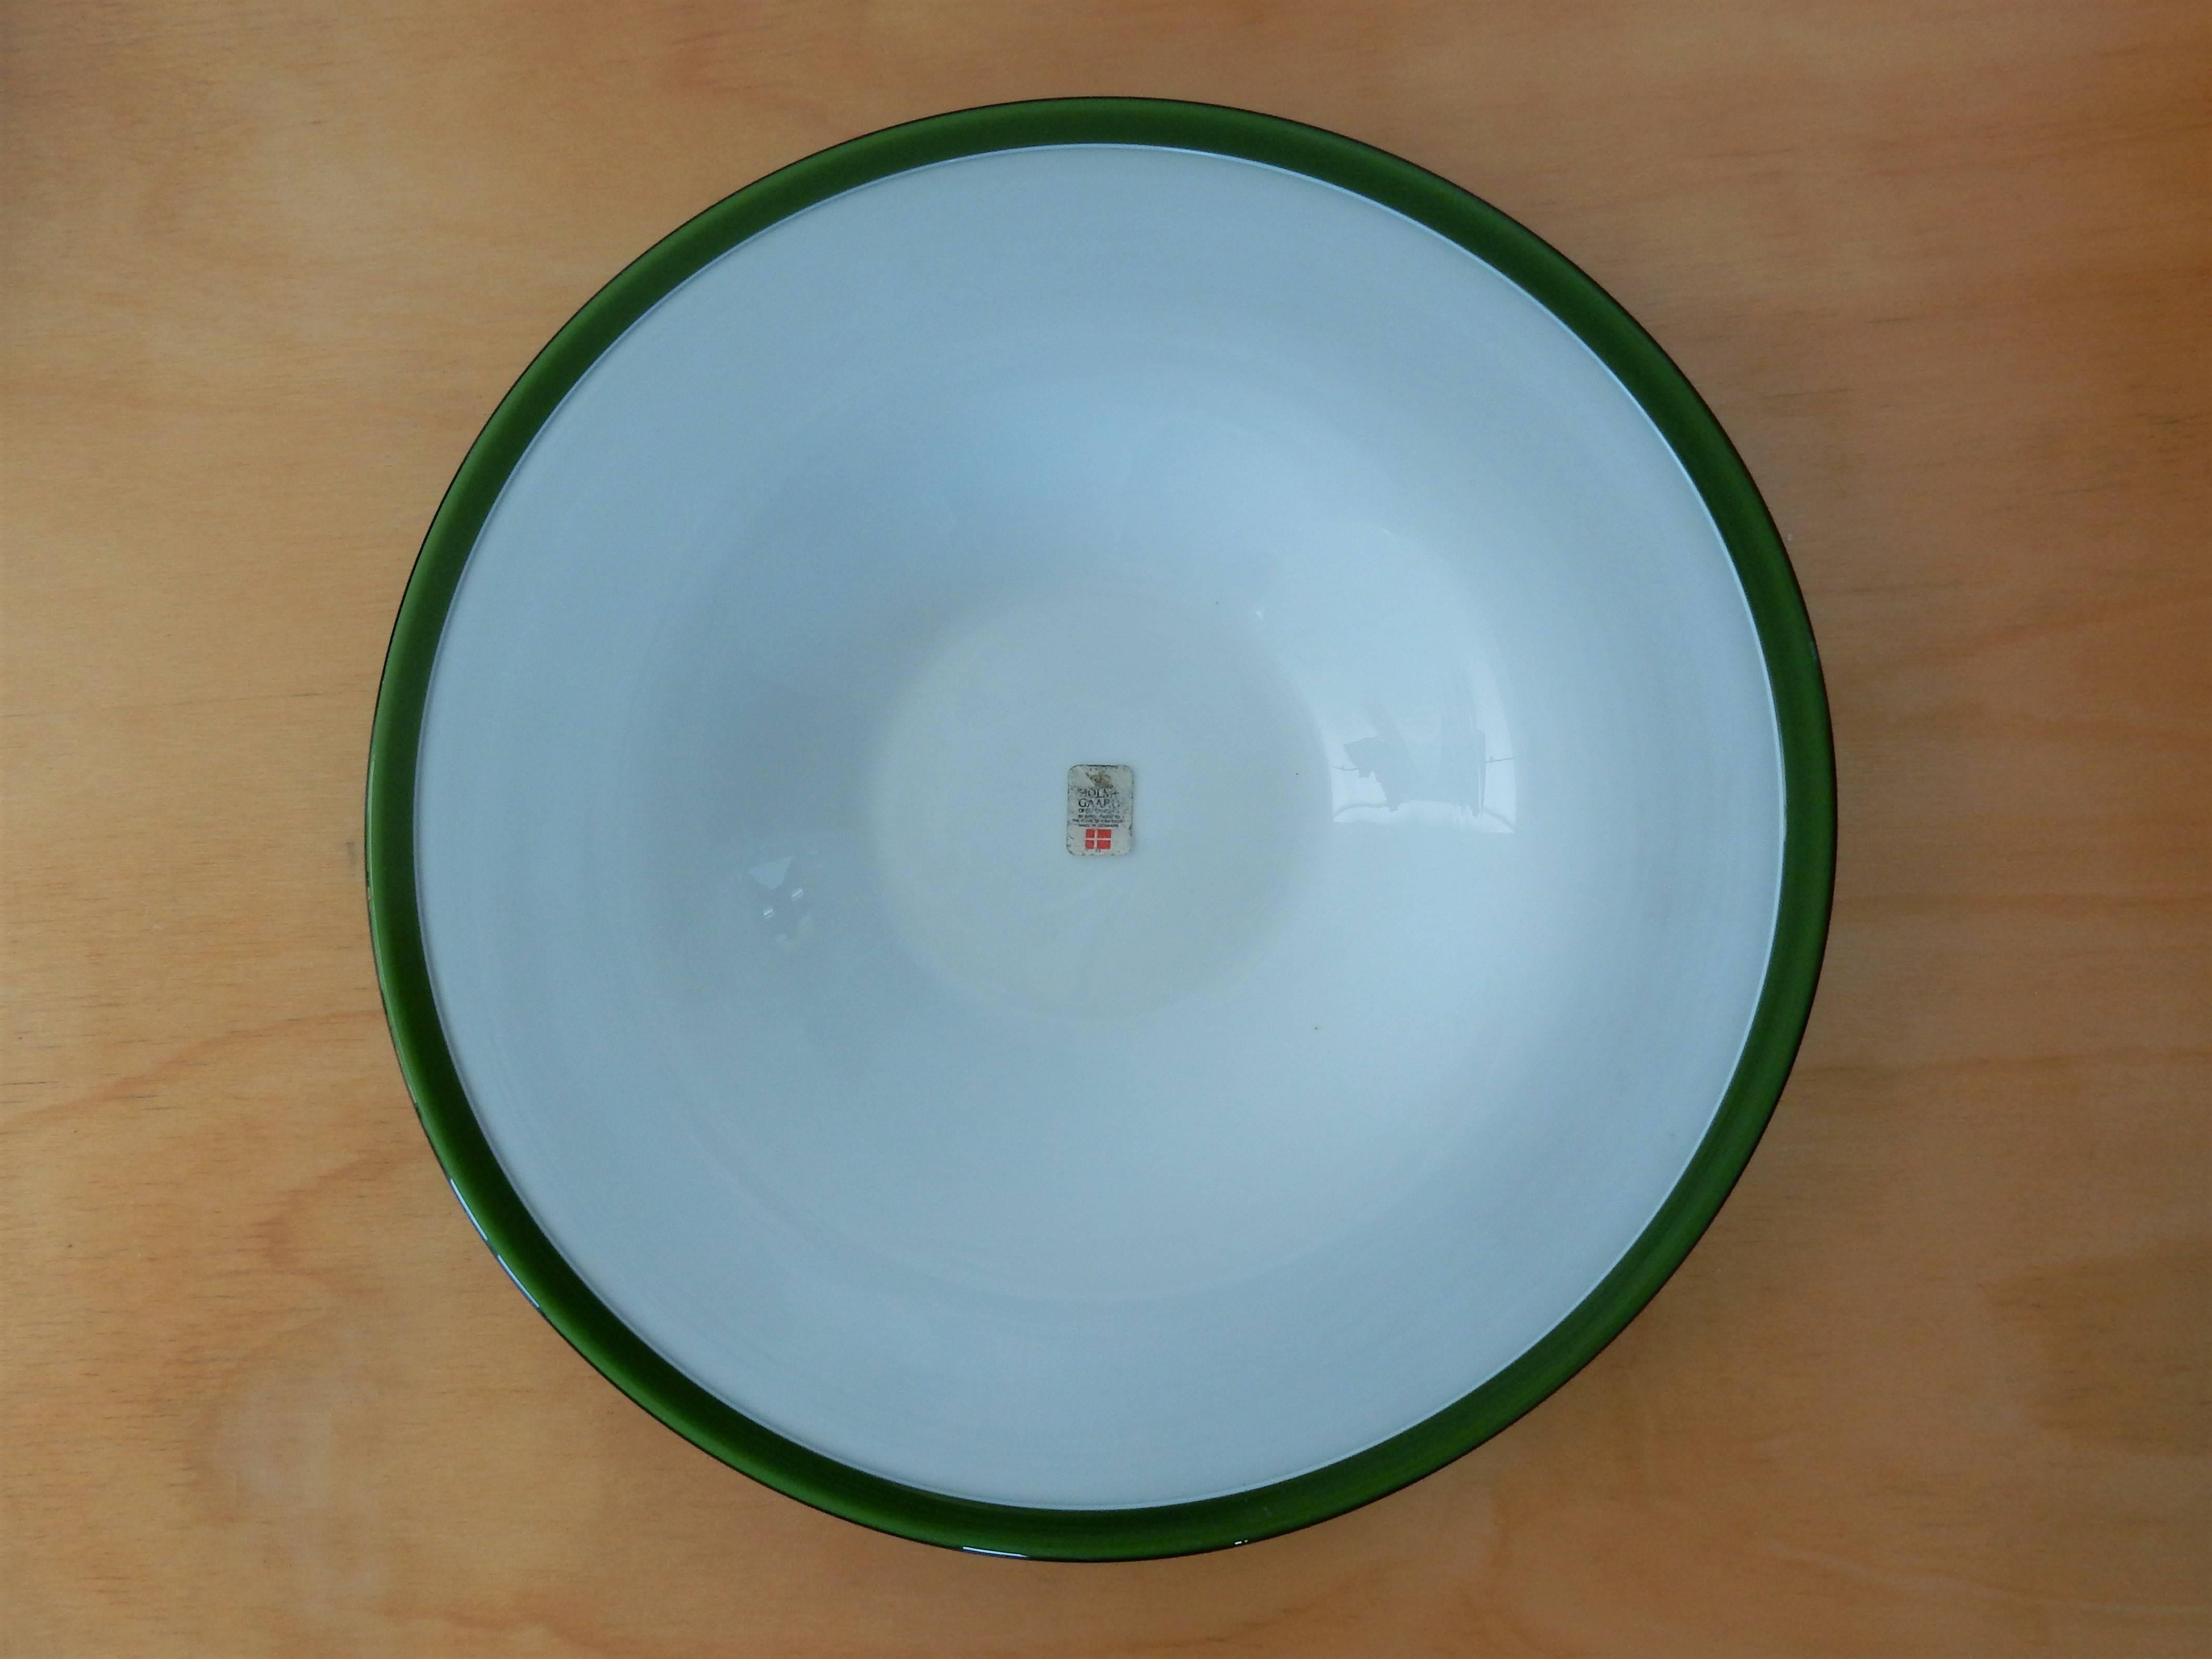 Very nice set with a small medium and a larger medium green glass bowl and a bowl plate from Kastrup-Holmegaard, designed by Michael Bang. In excellent condition with no defects. The bowls are unmarked, but we do have one original Holmegaard sticker